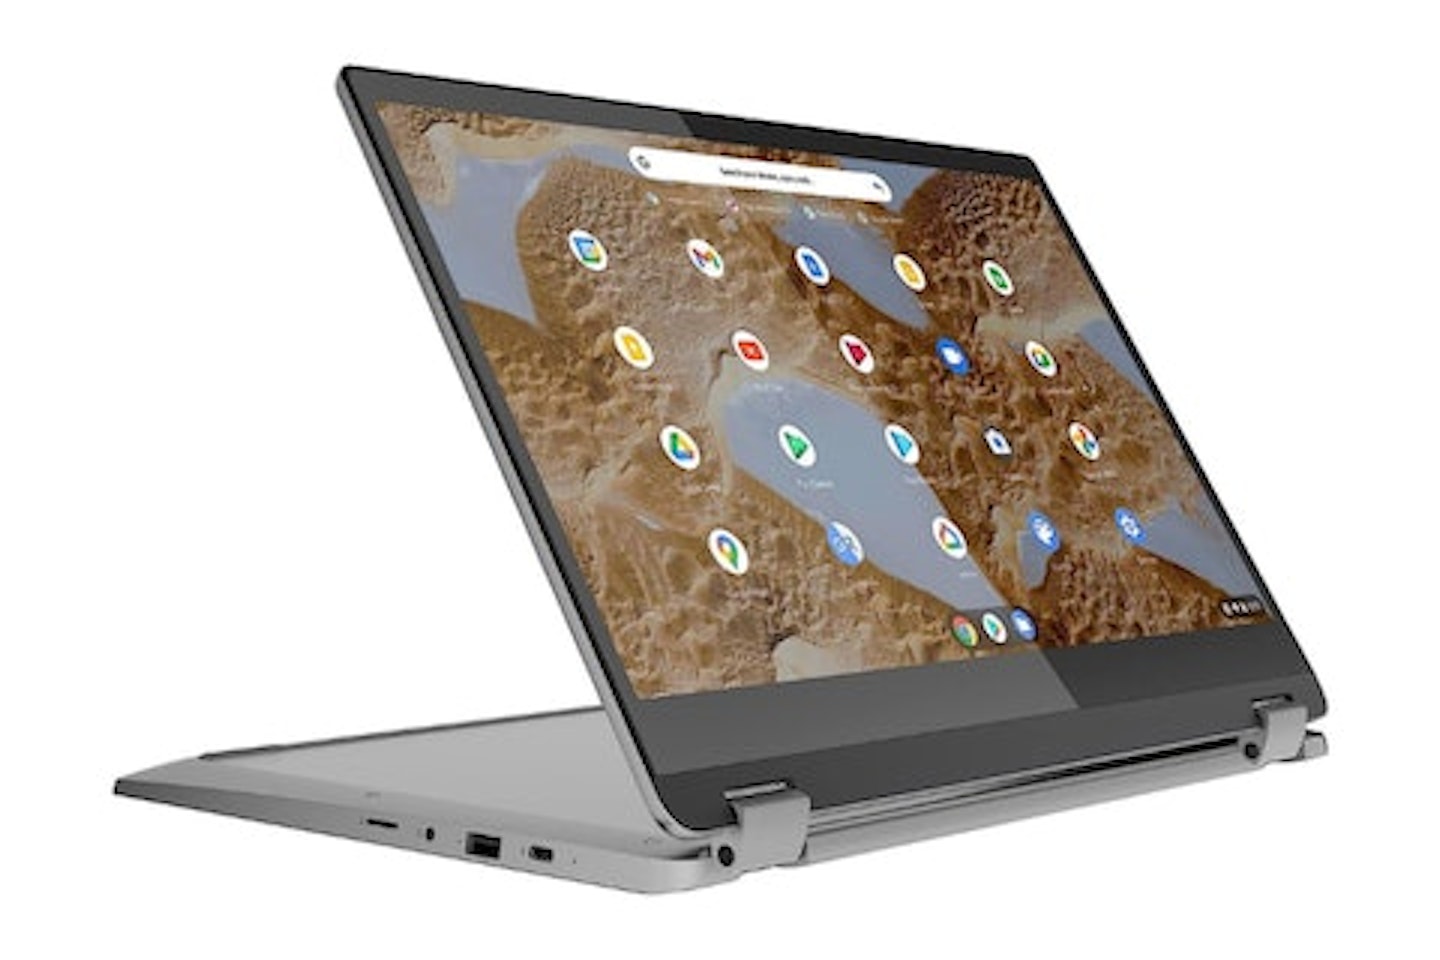   Lenovo IdeaPad Flex 3 Chromebook - possibly the best laptop with touchscreen